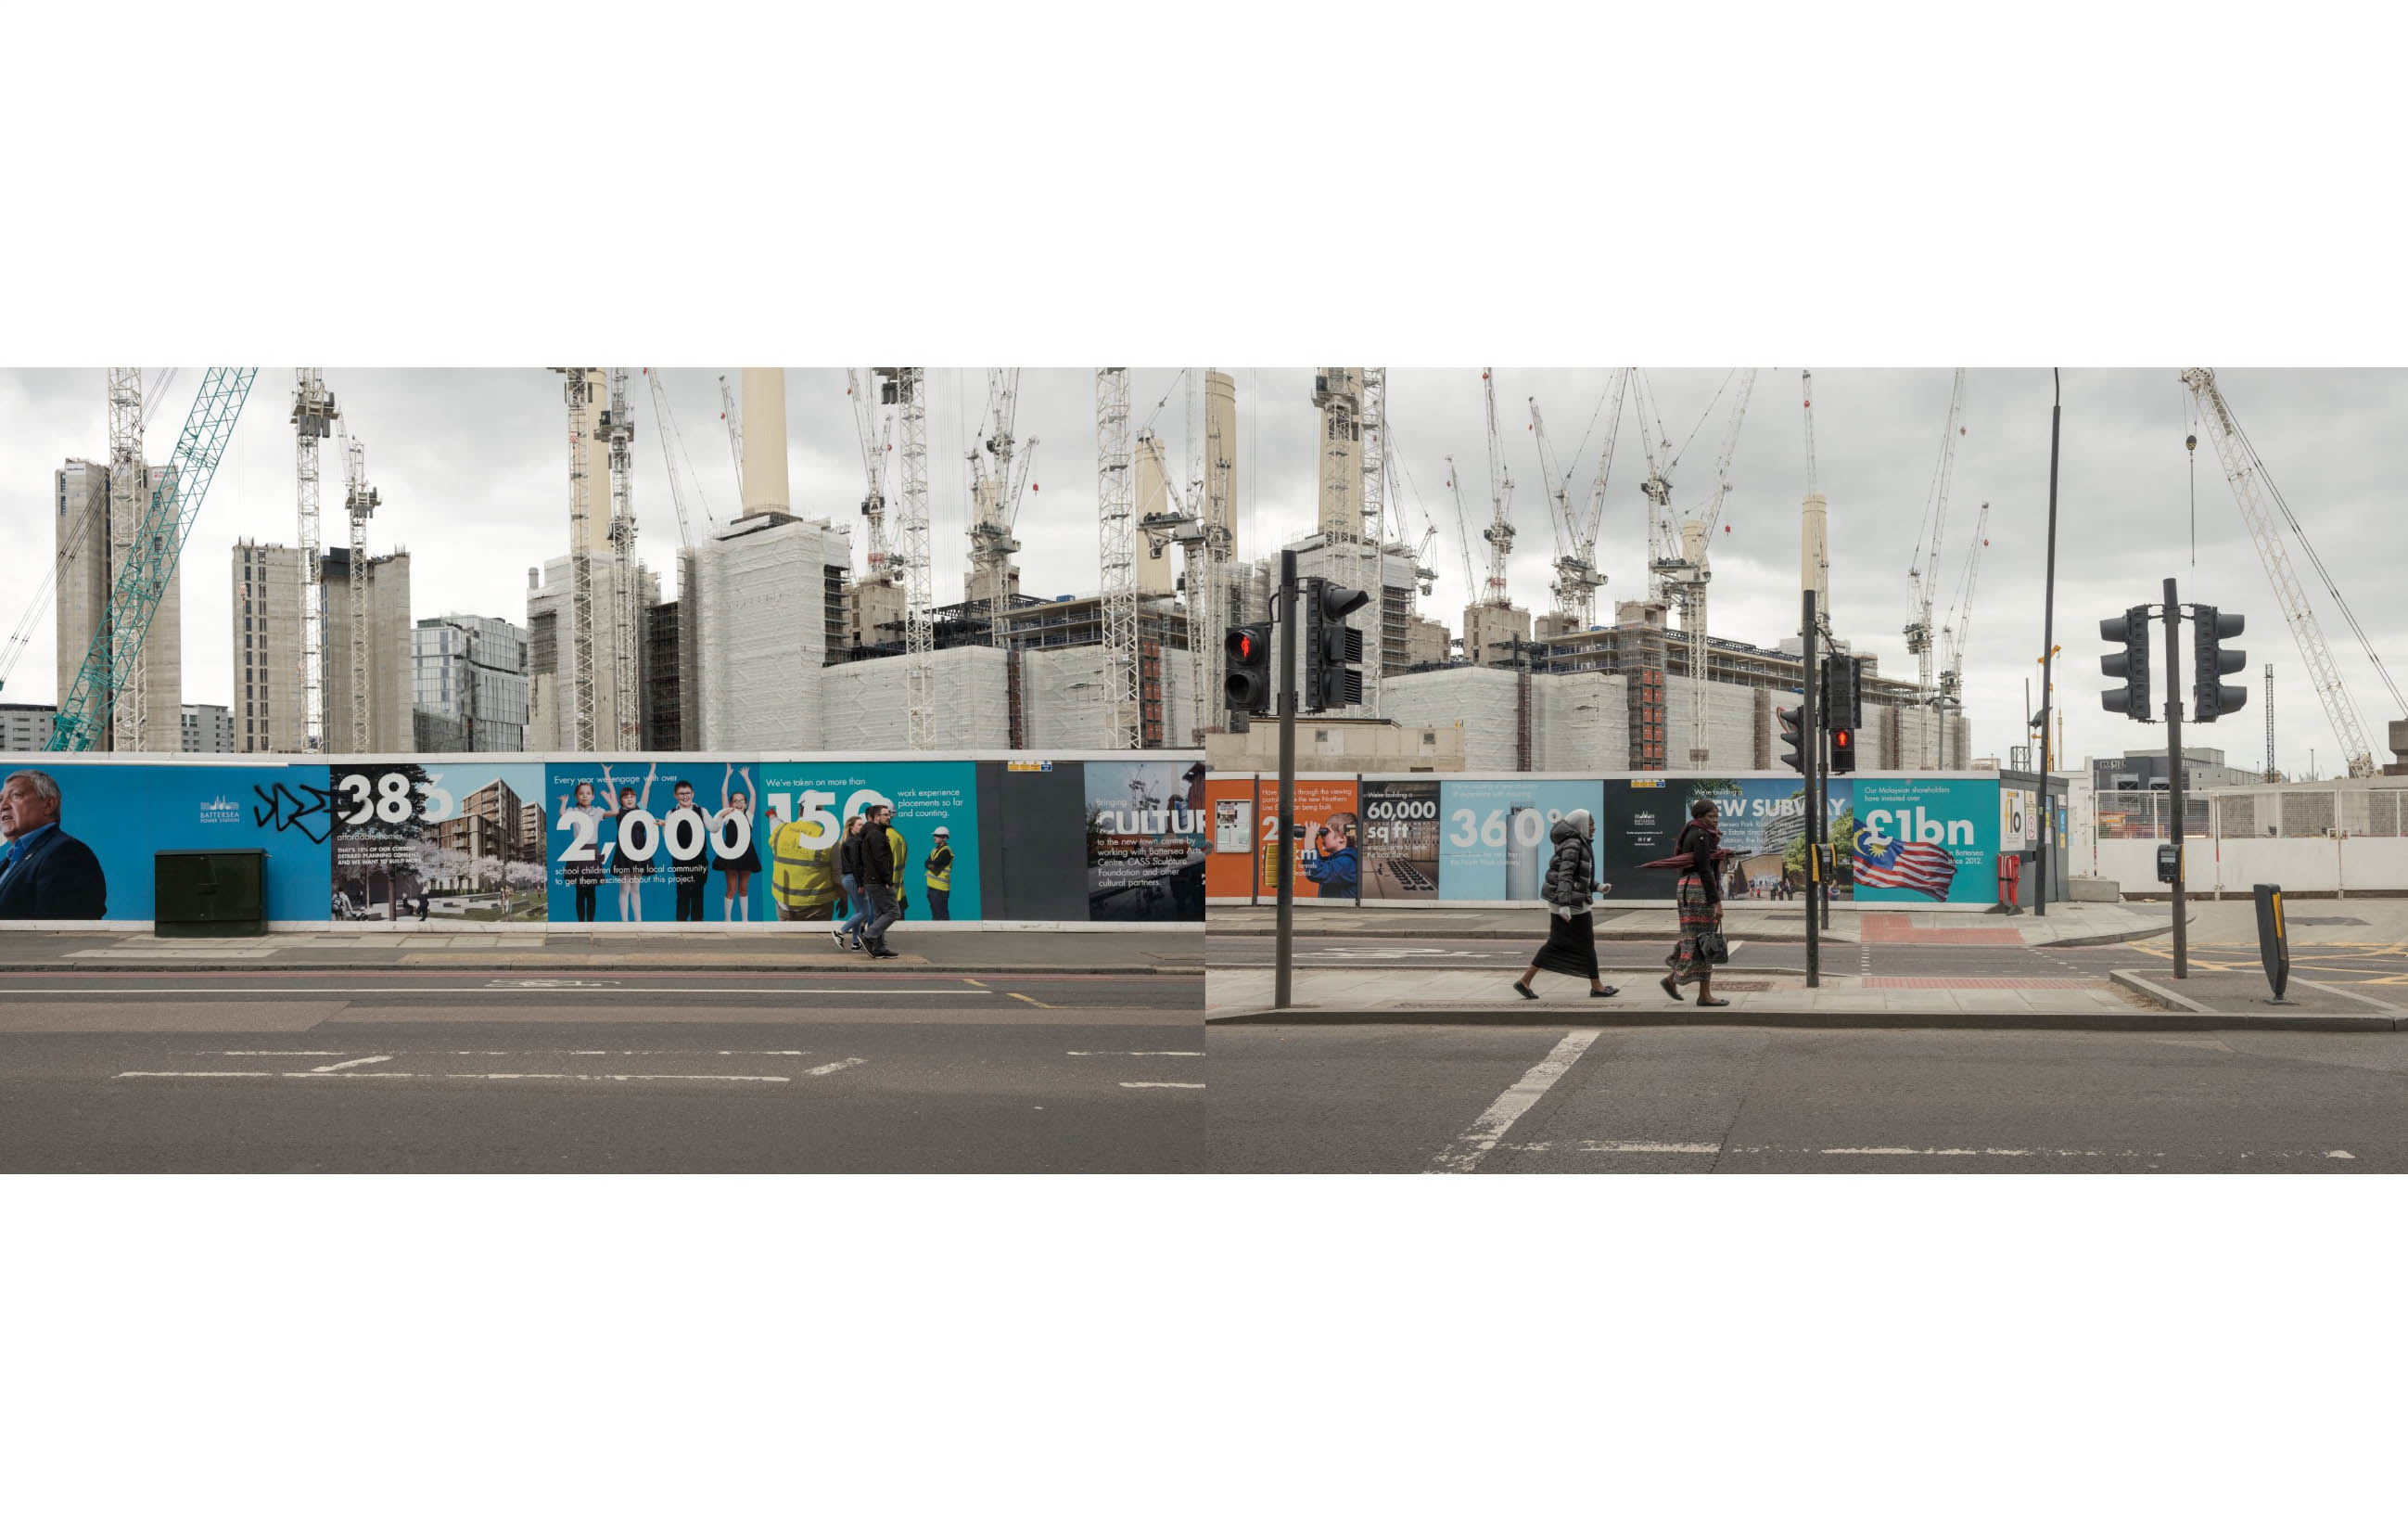 two photos of different hoardings around Battersea Power Station with pedestrians passing